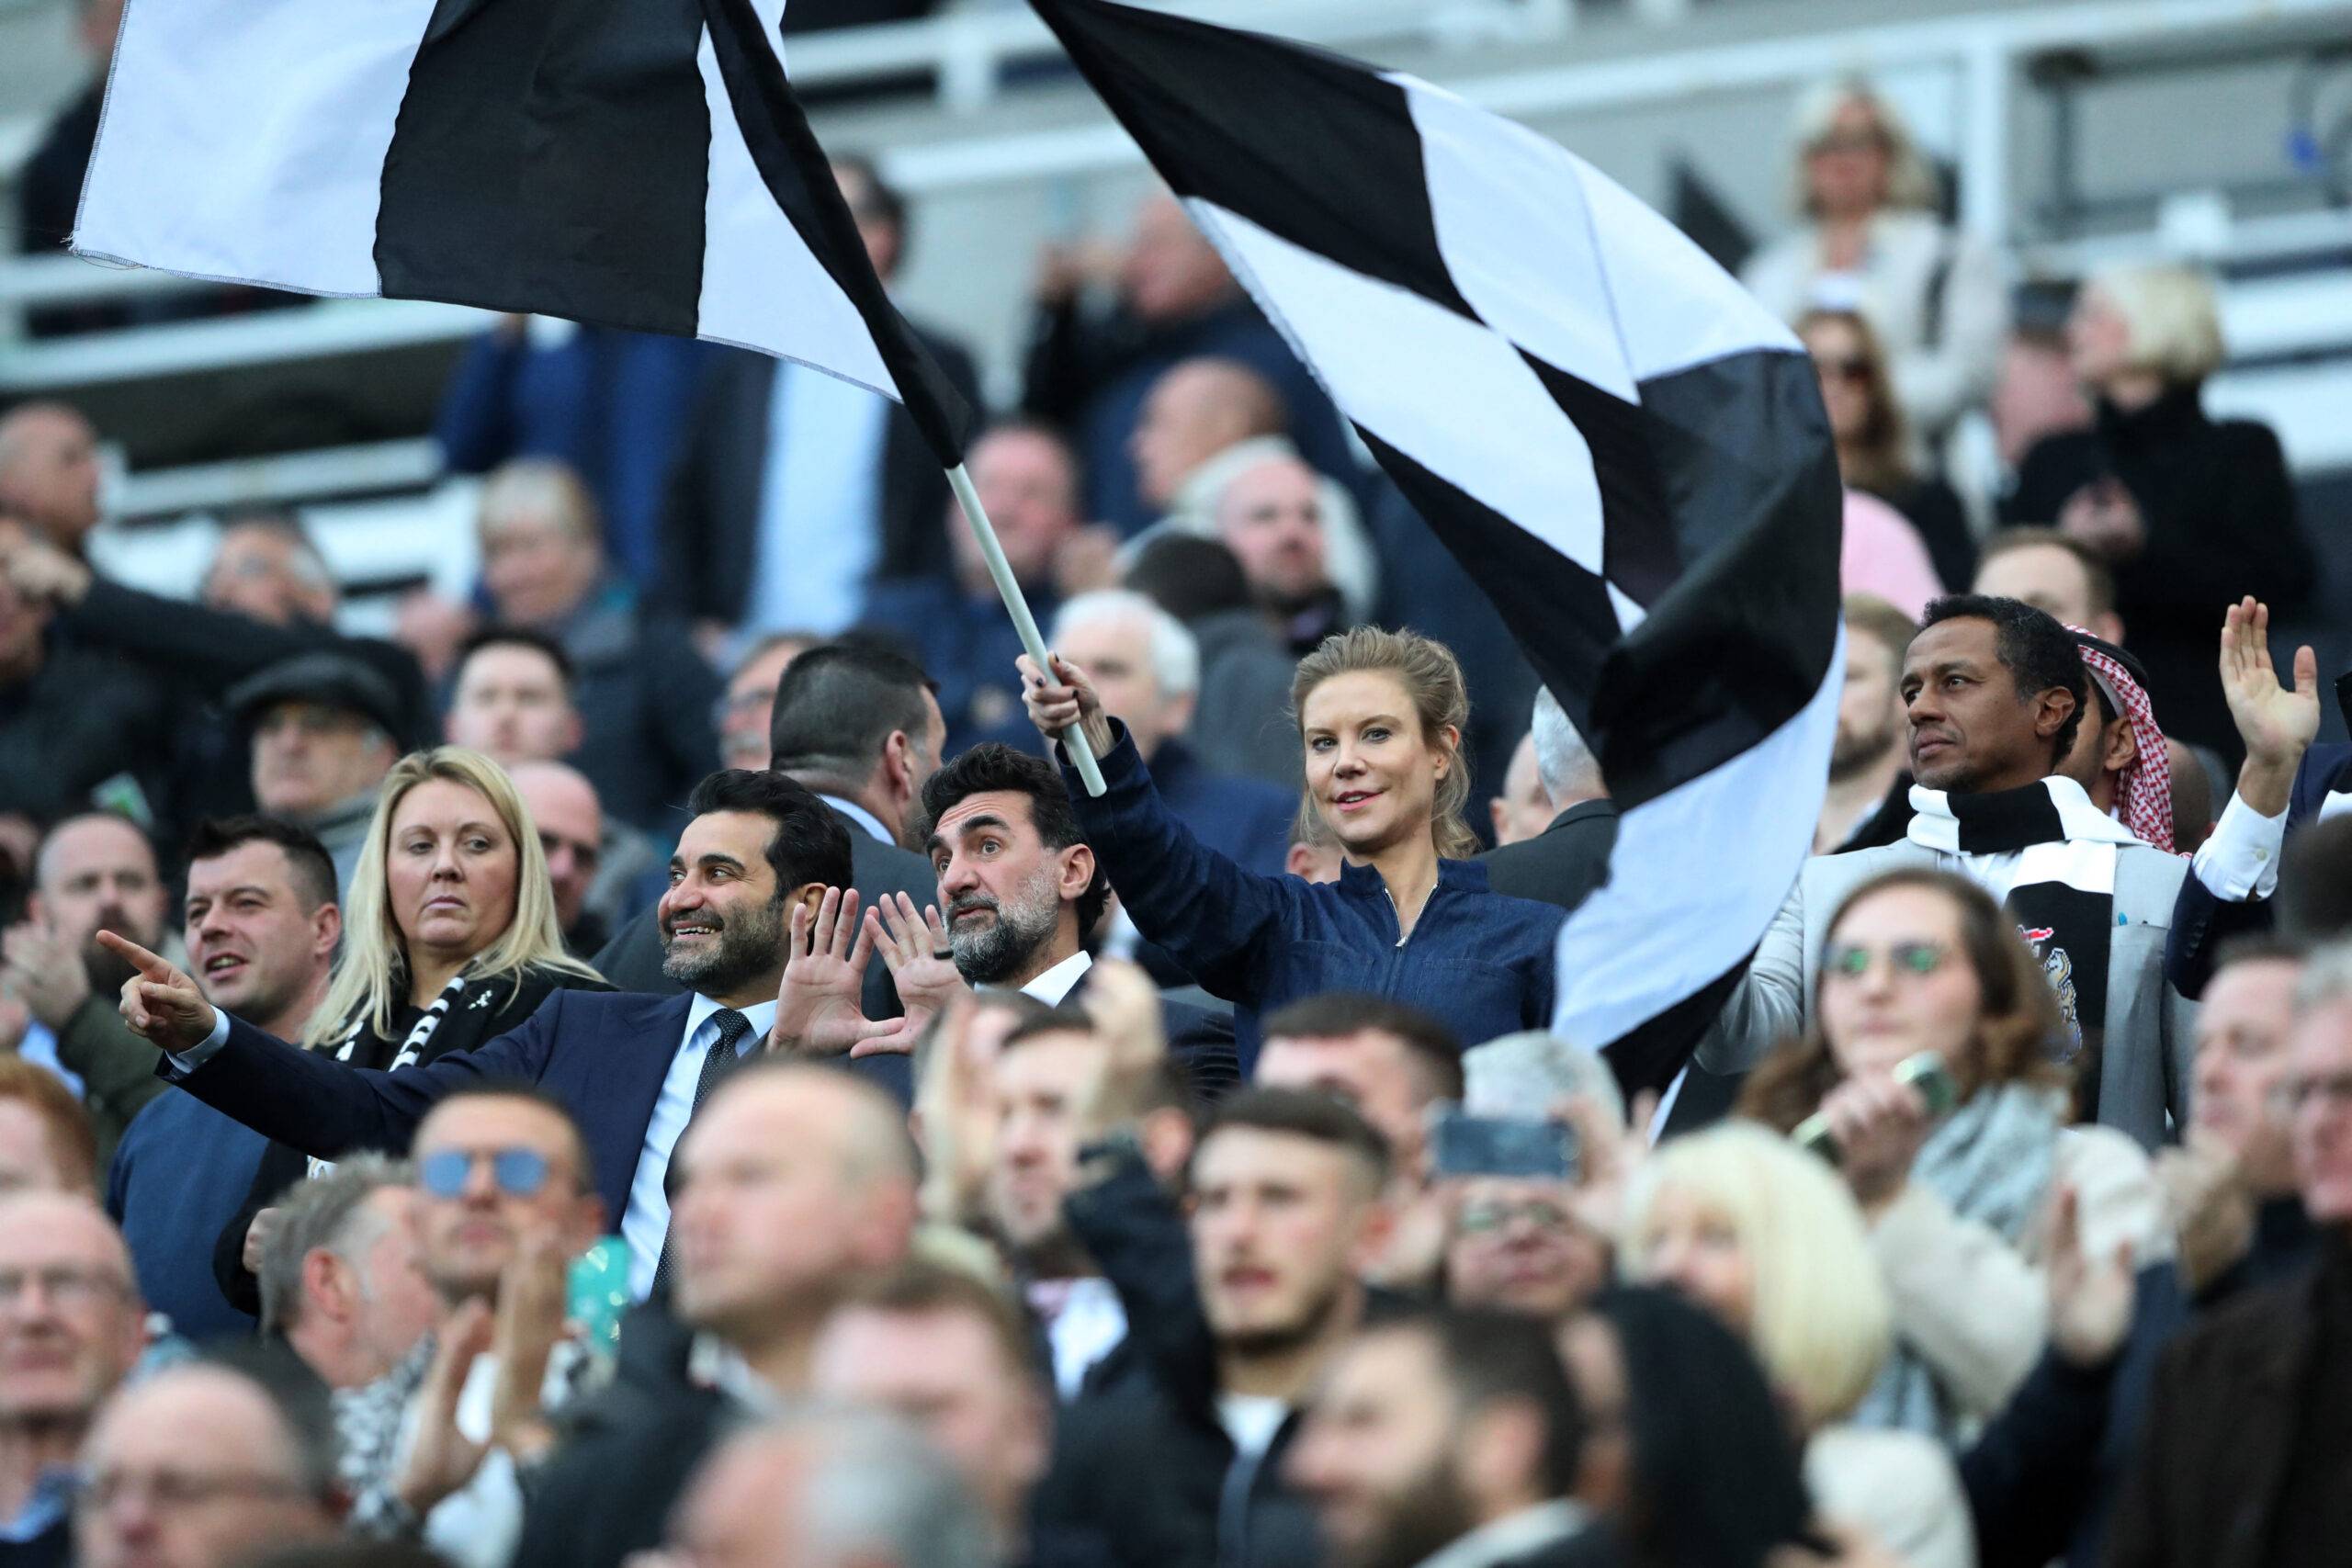 Newcastle United co-owner Amanda Staveley shows her support from the stands